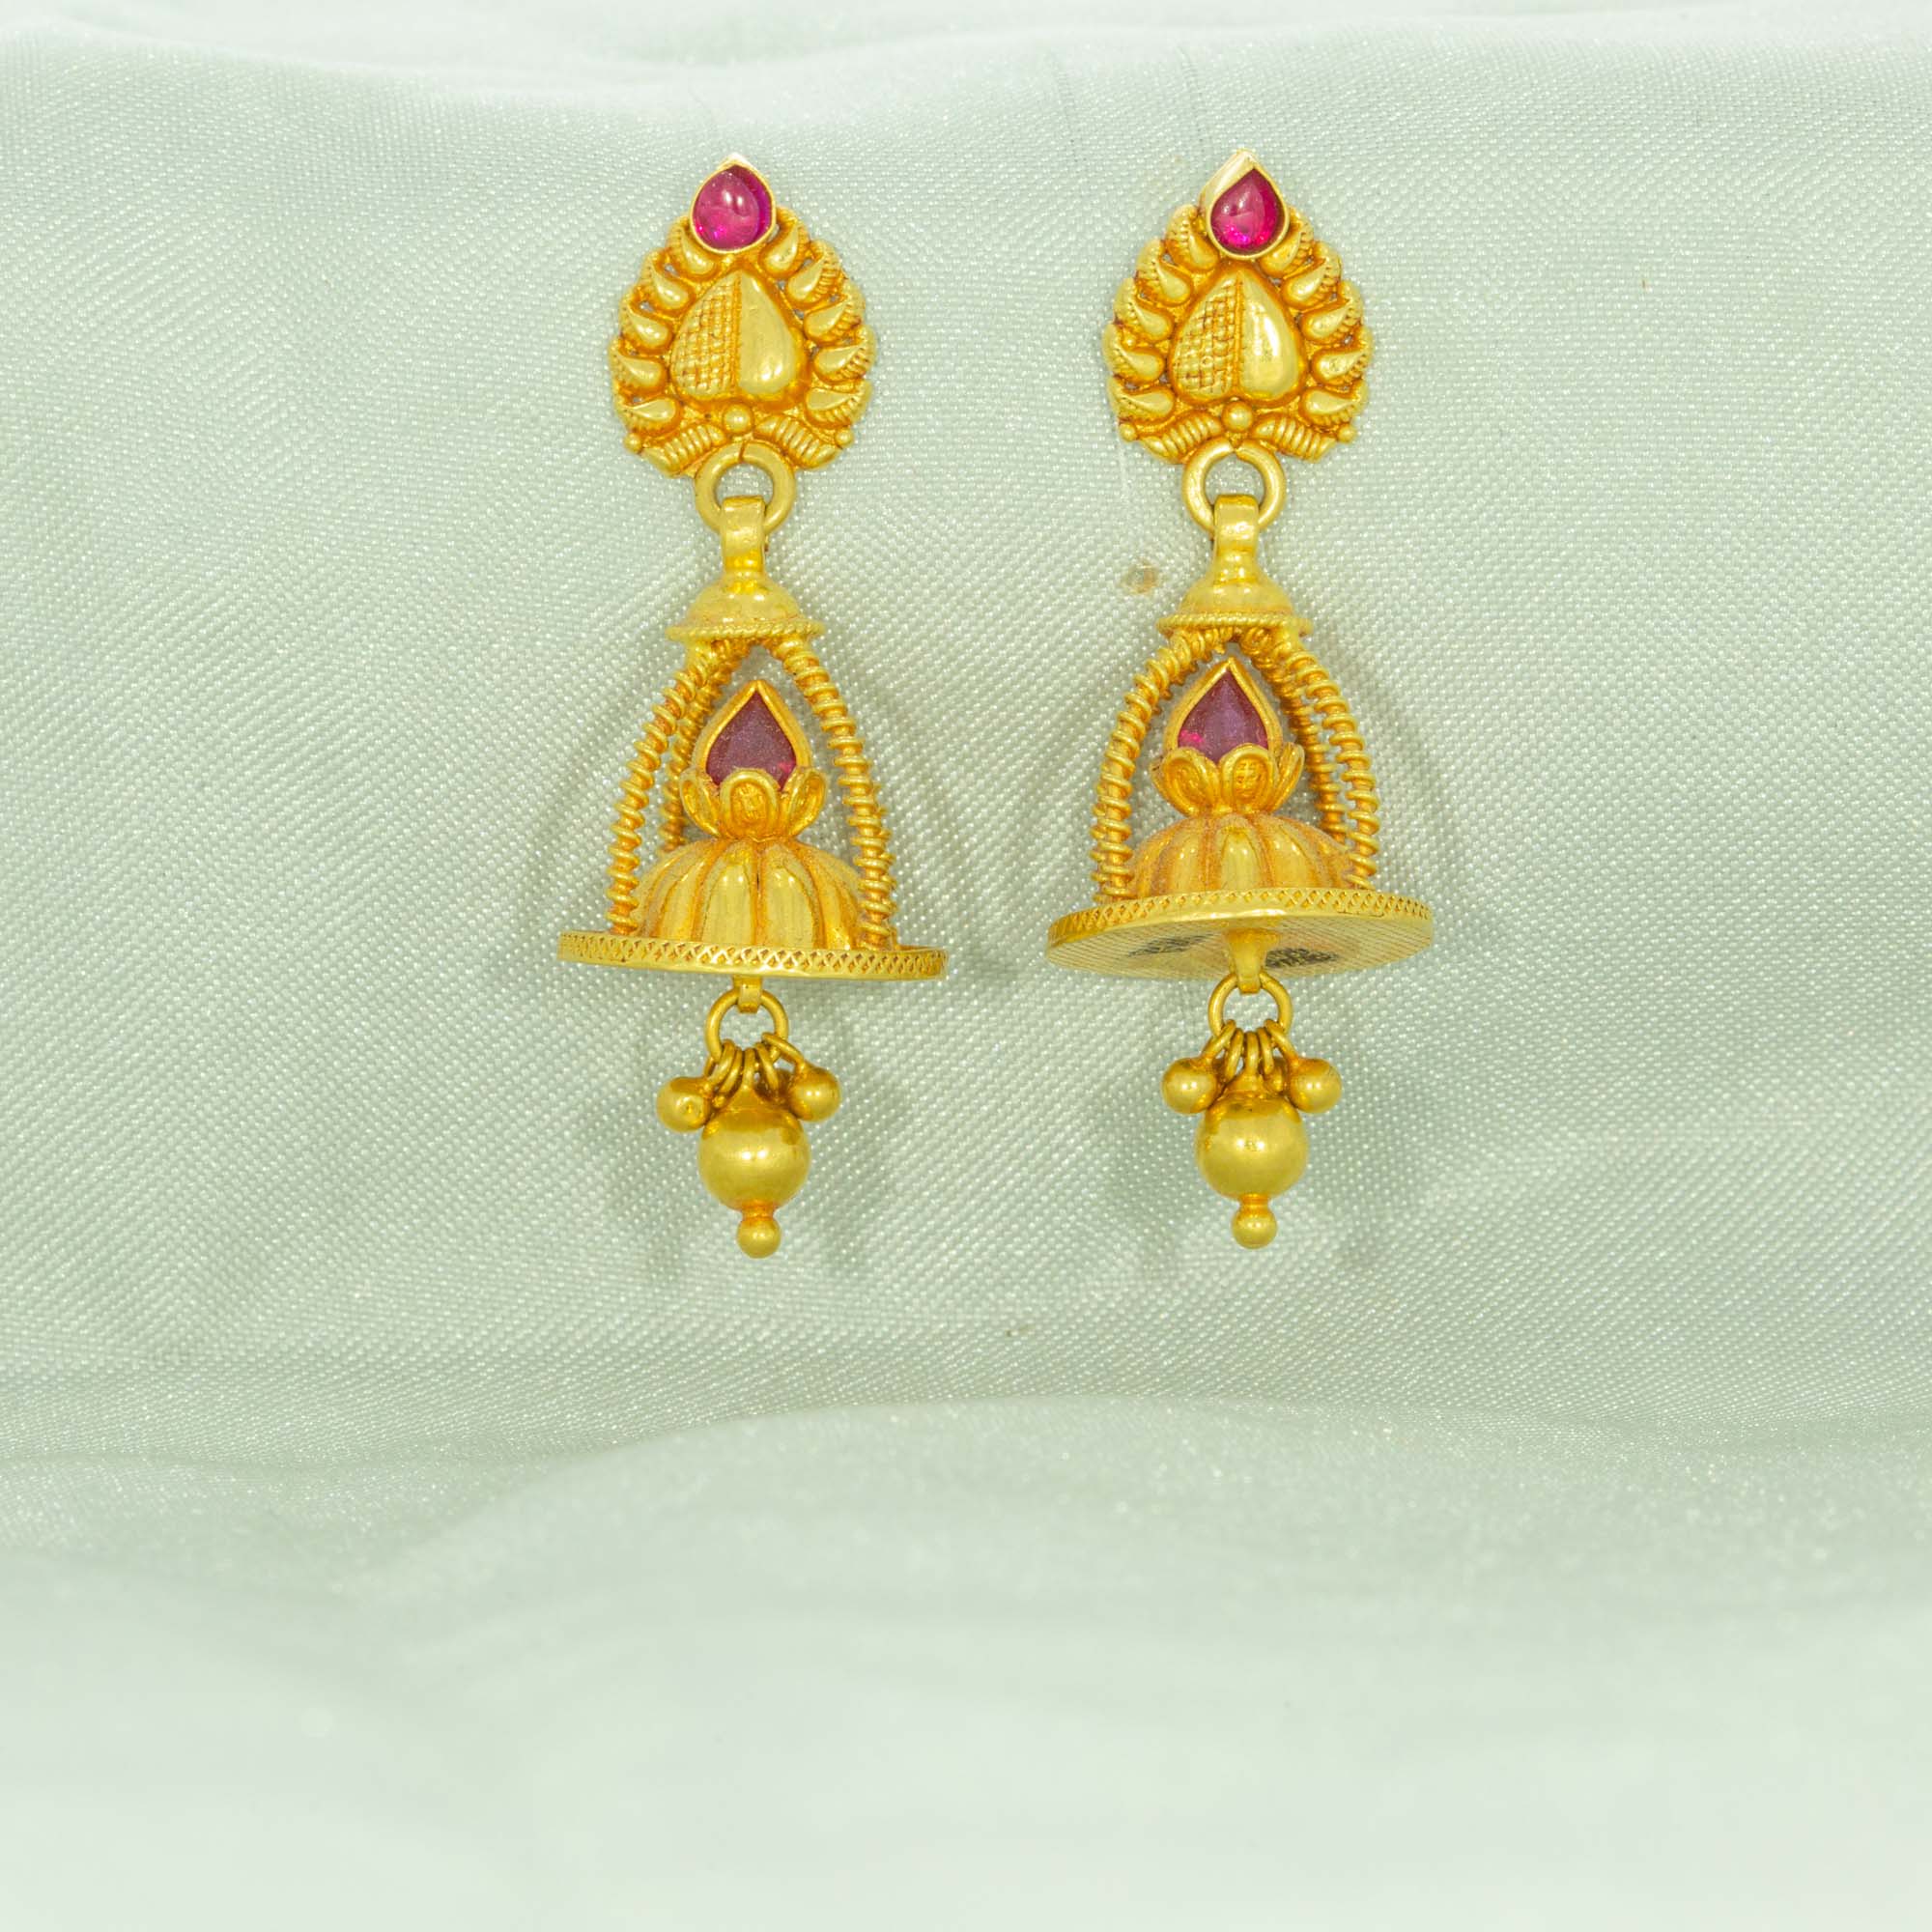 OOMPH Jewellery Antique Gold Tone Beads Peacock Design Ethnic Jhumka  Earrings Buy OOMPH Jewellery Antique Gold Tone Beads Peacock Design Ethnic Jhumka  Earrings Online at Best Price in India  Nykaa